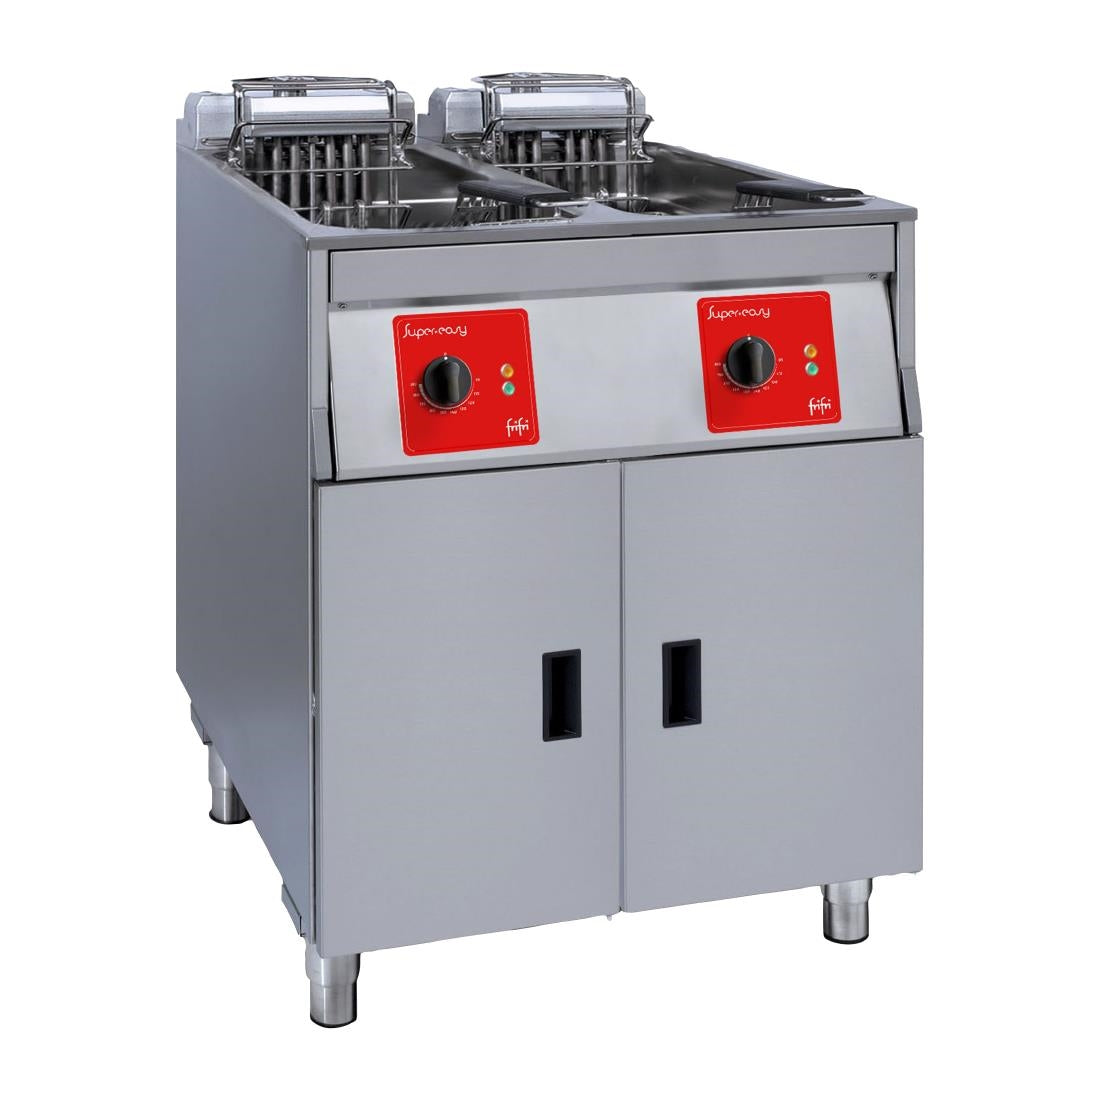 CX908 FriFri Super Easy 622 Electric Free Standing Twin Tank Fryer SL622H32N0 JD Catering Equipment Solutions Ltd